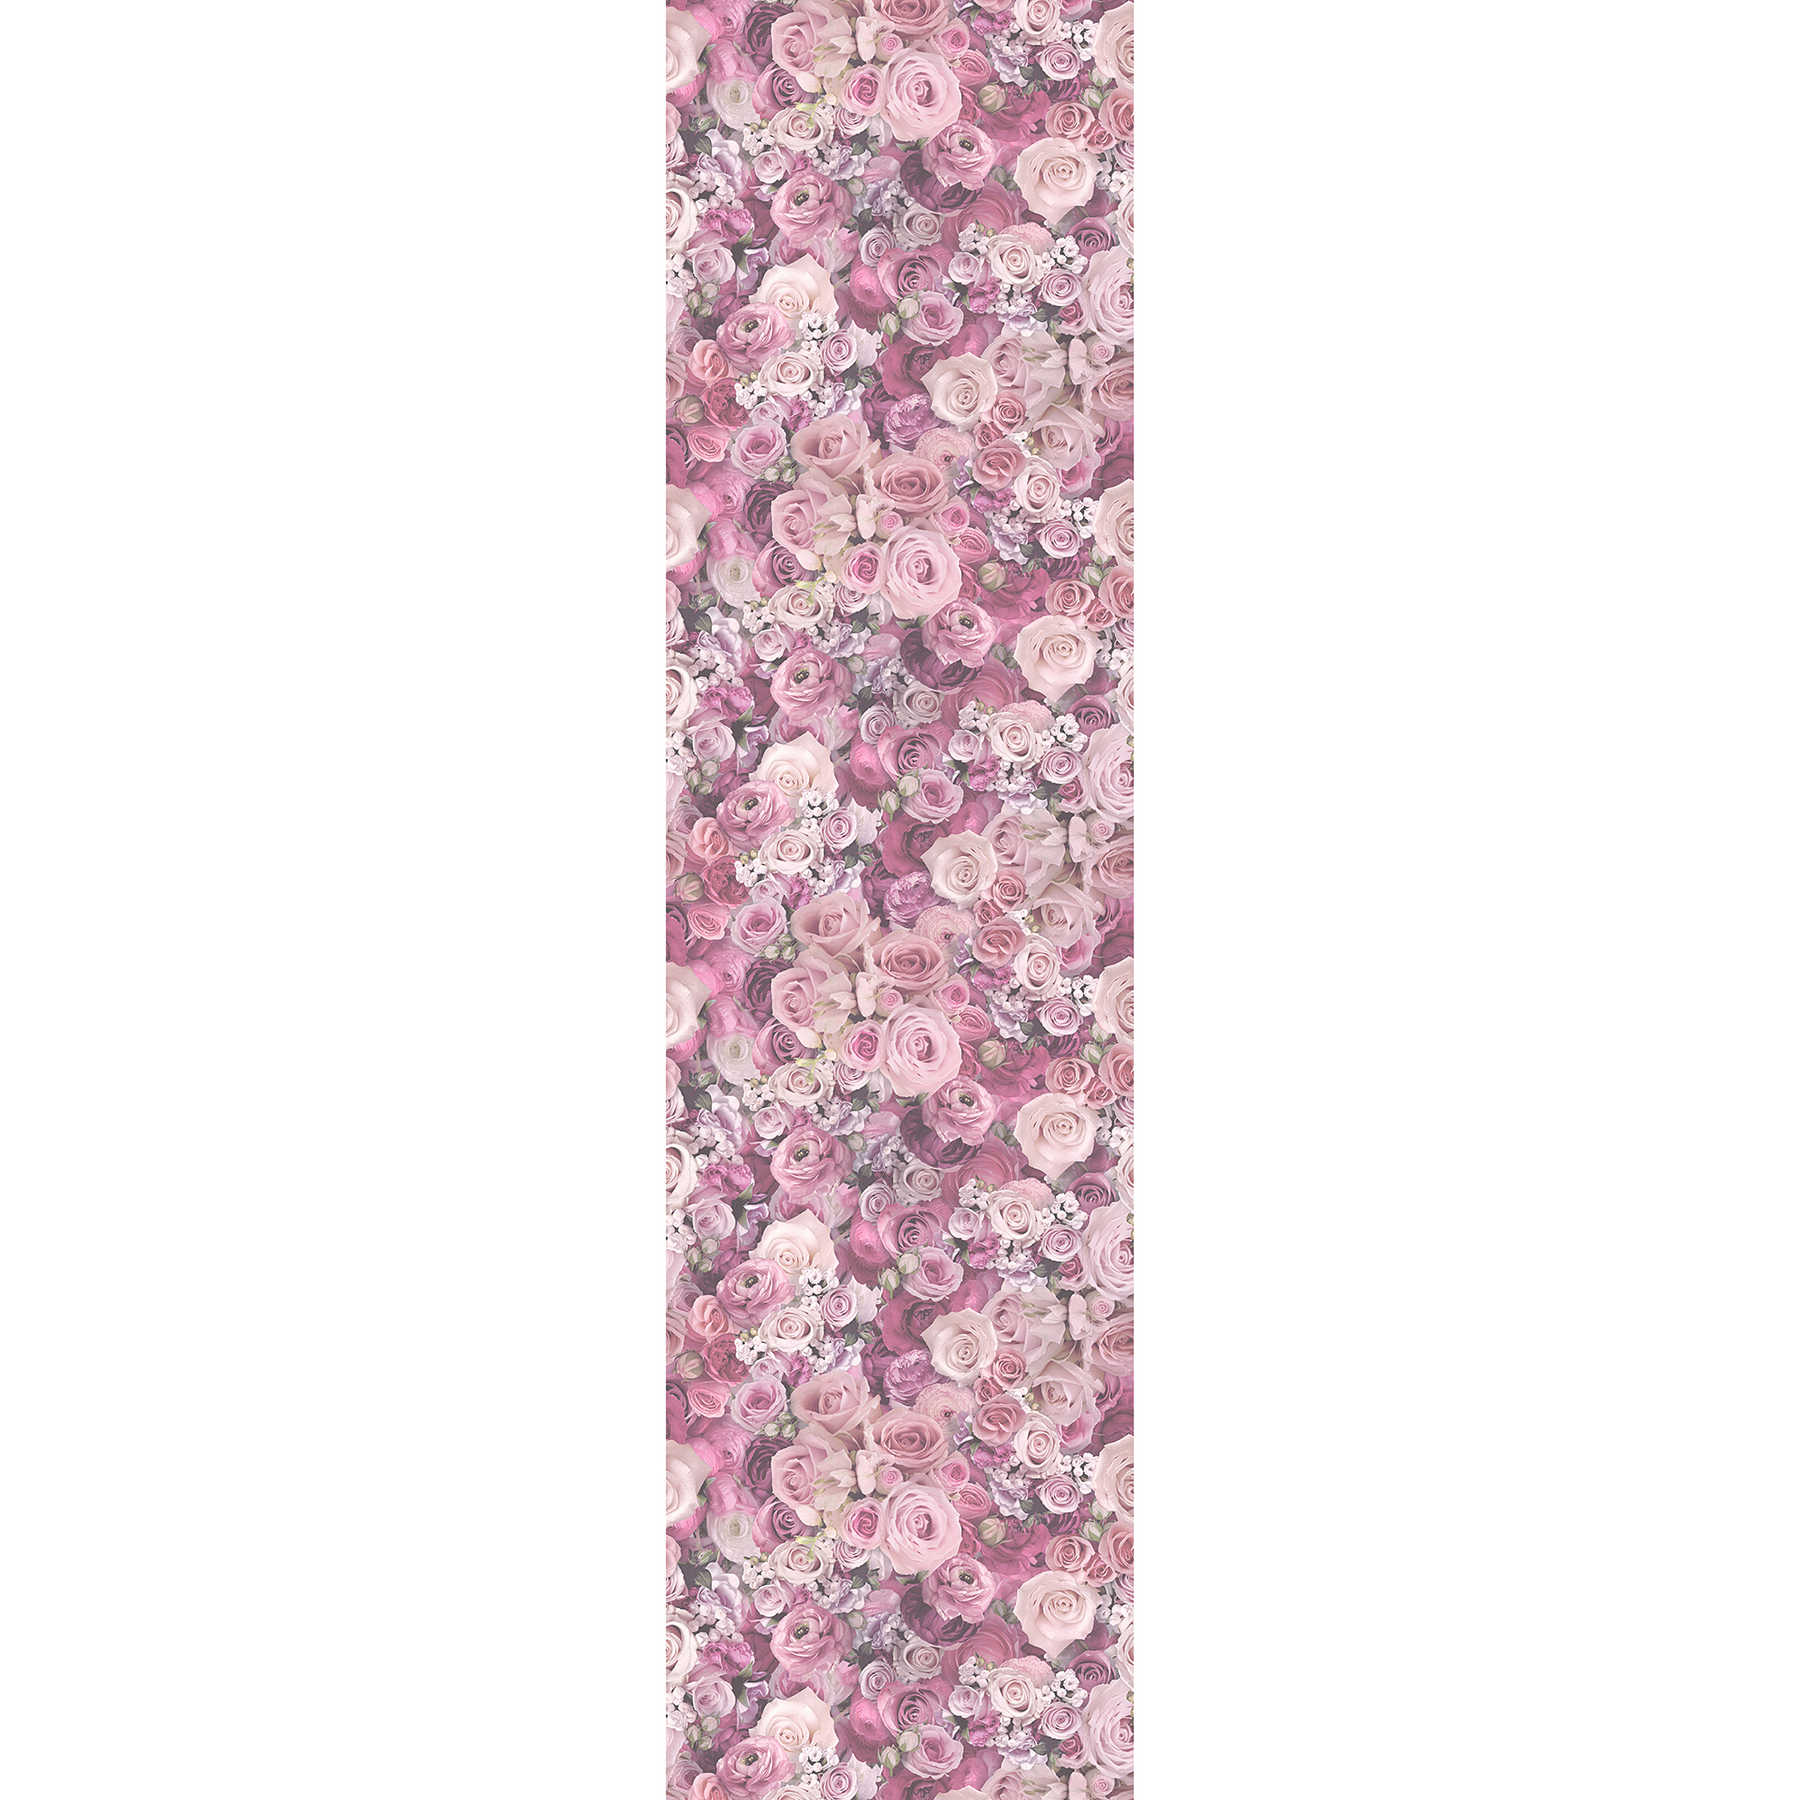 Non-woven wallpaper roses with 3D motif - pink, violet
